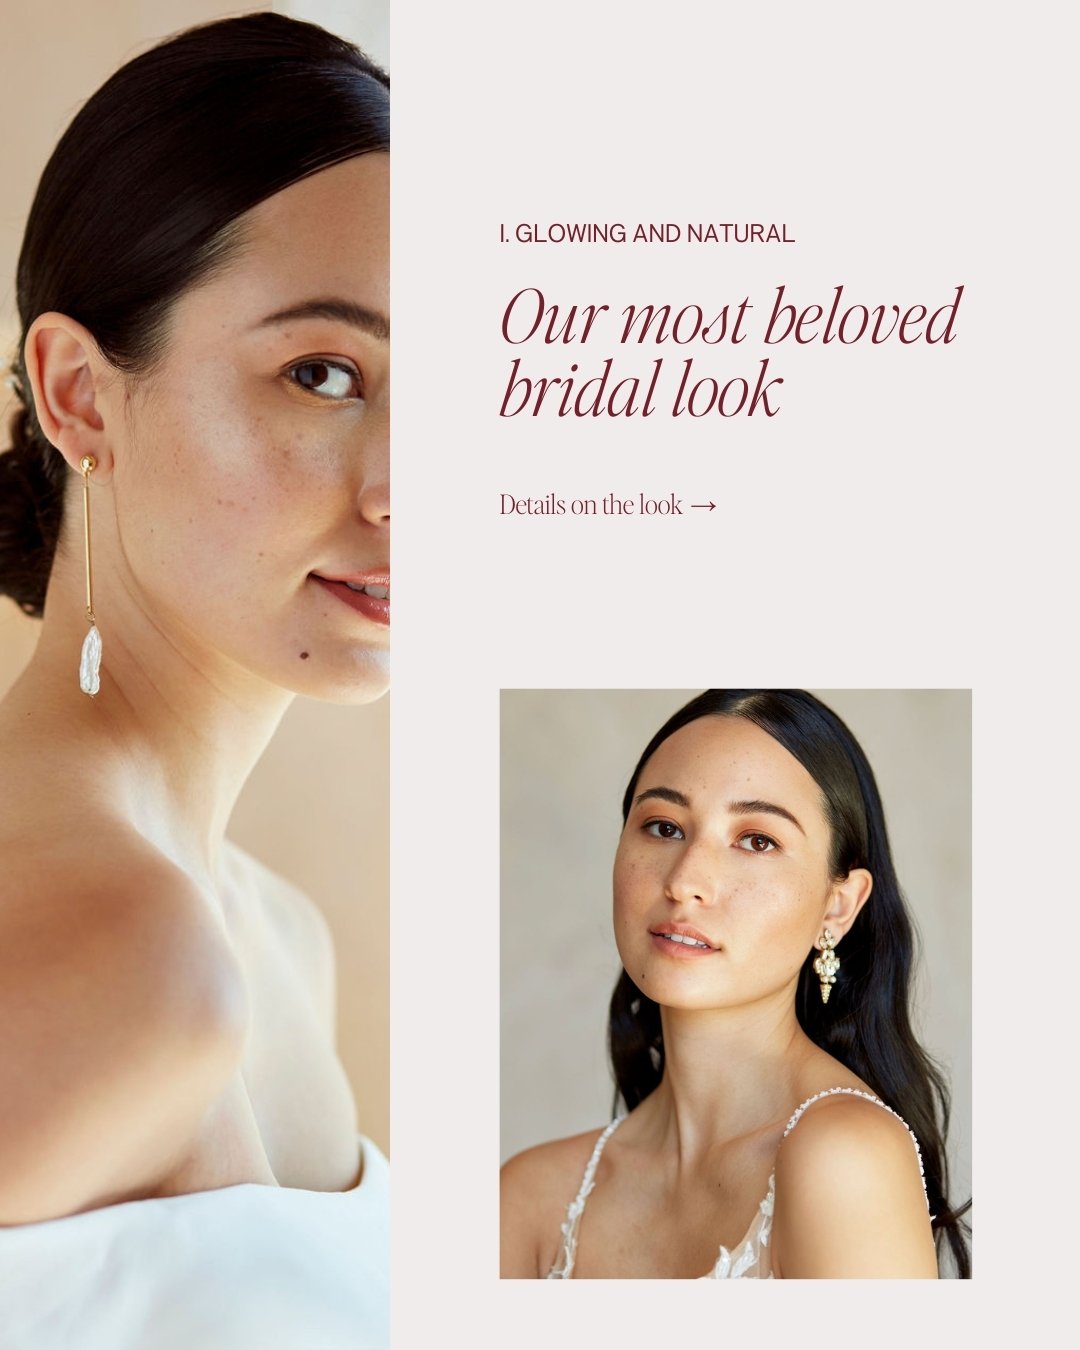 This is our most beloved bridal look, glowing and natural skin.

What new products are you currently using to get that fresh, just from the spa look? I have tried so many that we use on brides but always love to learn about more that you all love!
Le